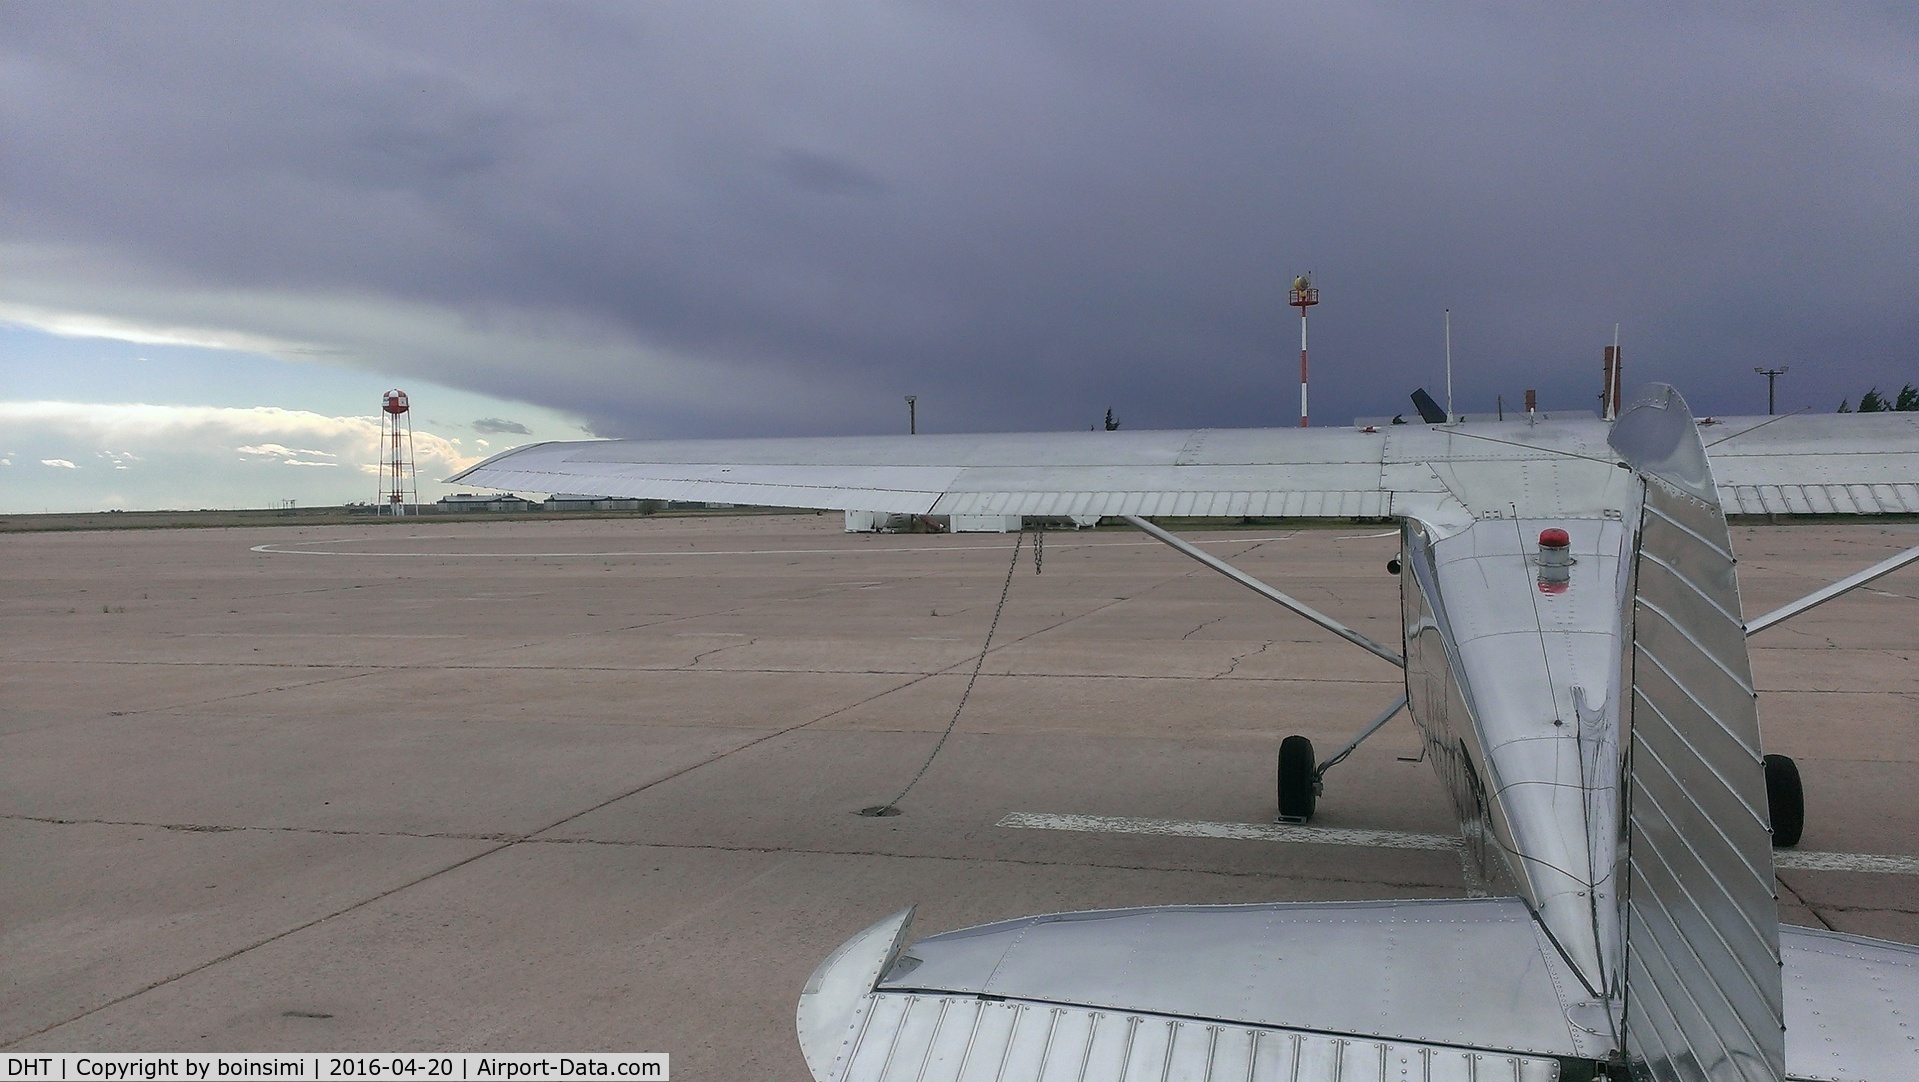 Dalhart Municipal Airport (DHT) - N1748D alone on the ramp at KDHT in Dalhart, TX as a monster thunderstorm bears down on us from the west.  Good Samaritan and head mechanic, Chuck, at Larsen Aviation helped me get it into a hangar 20 minutes after this shot before the storm hit.